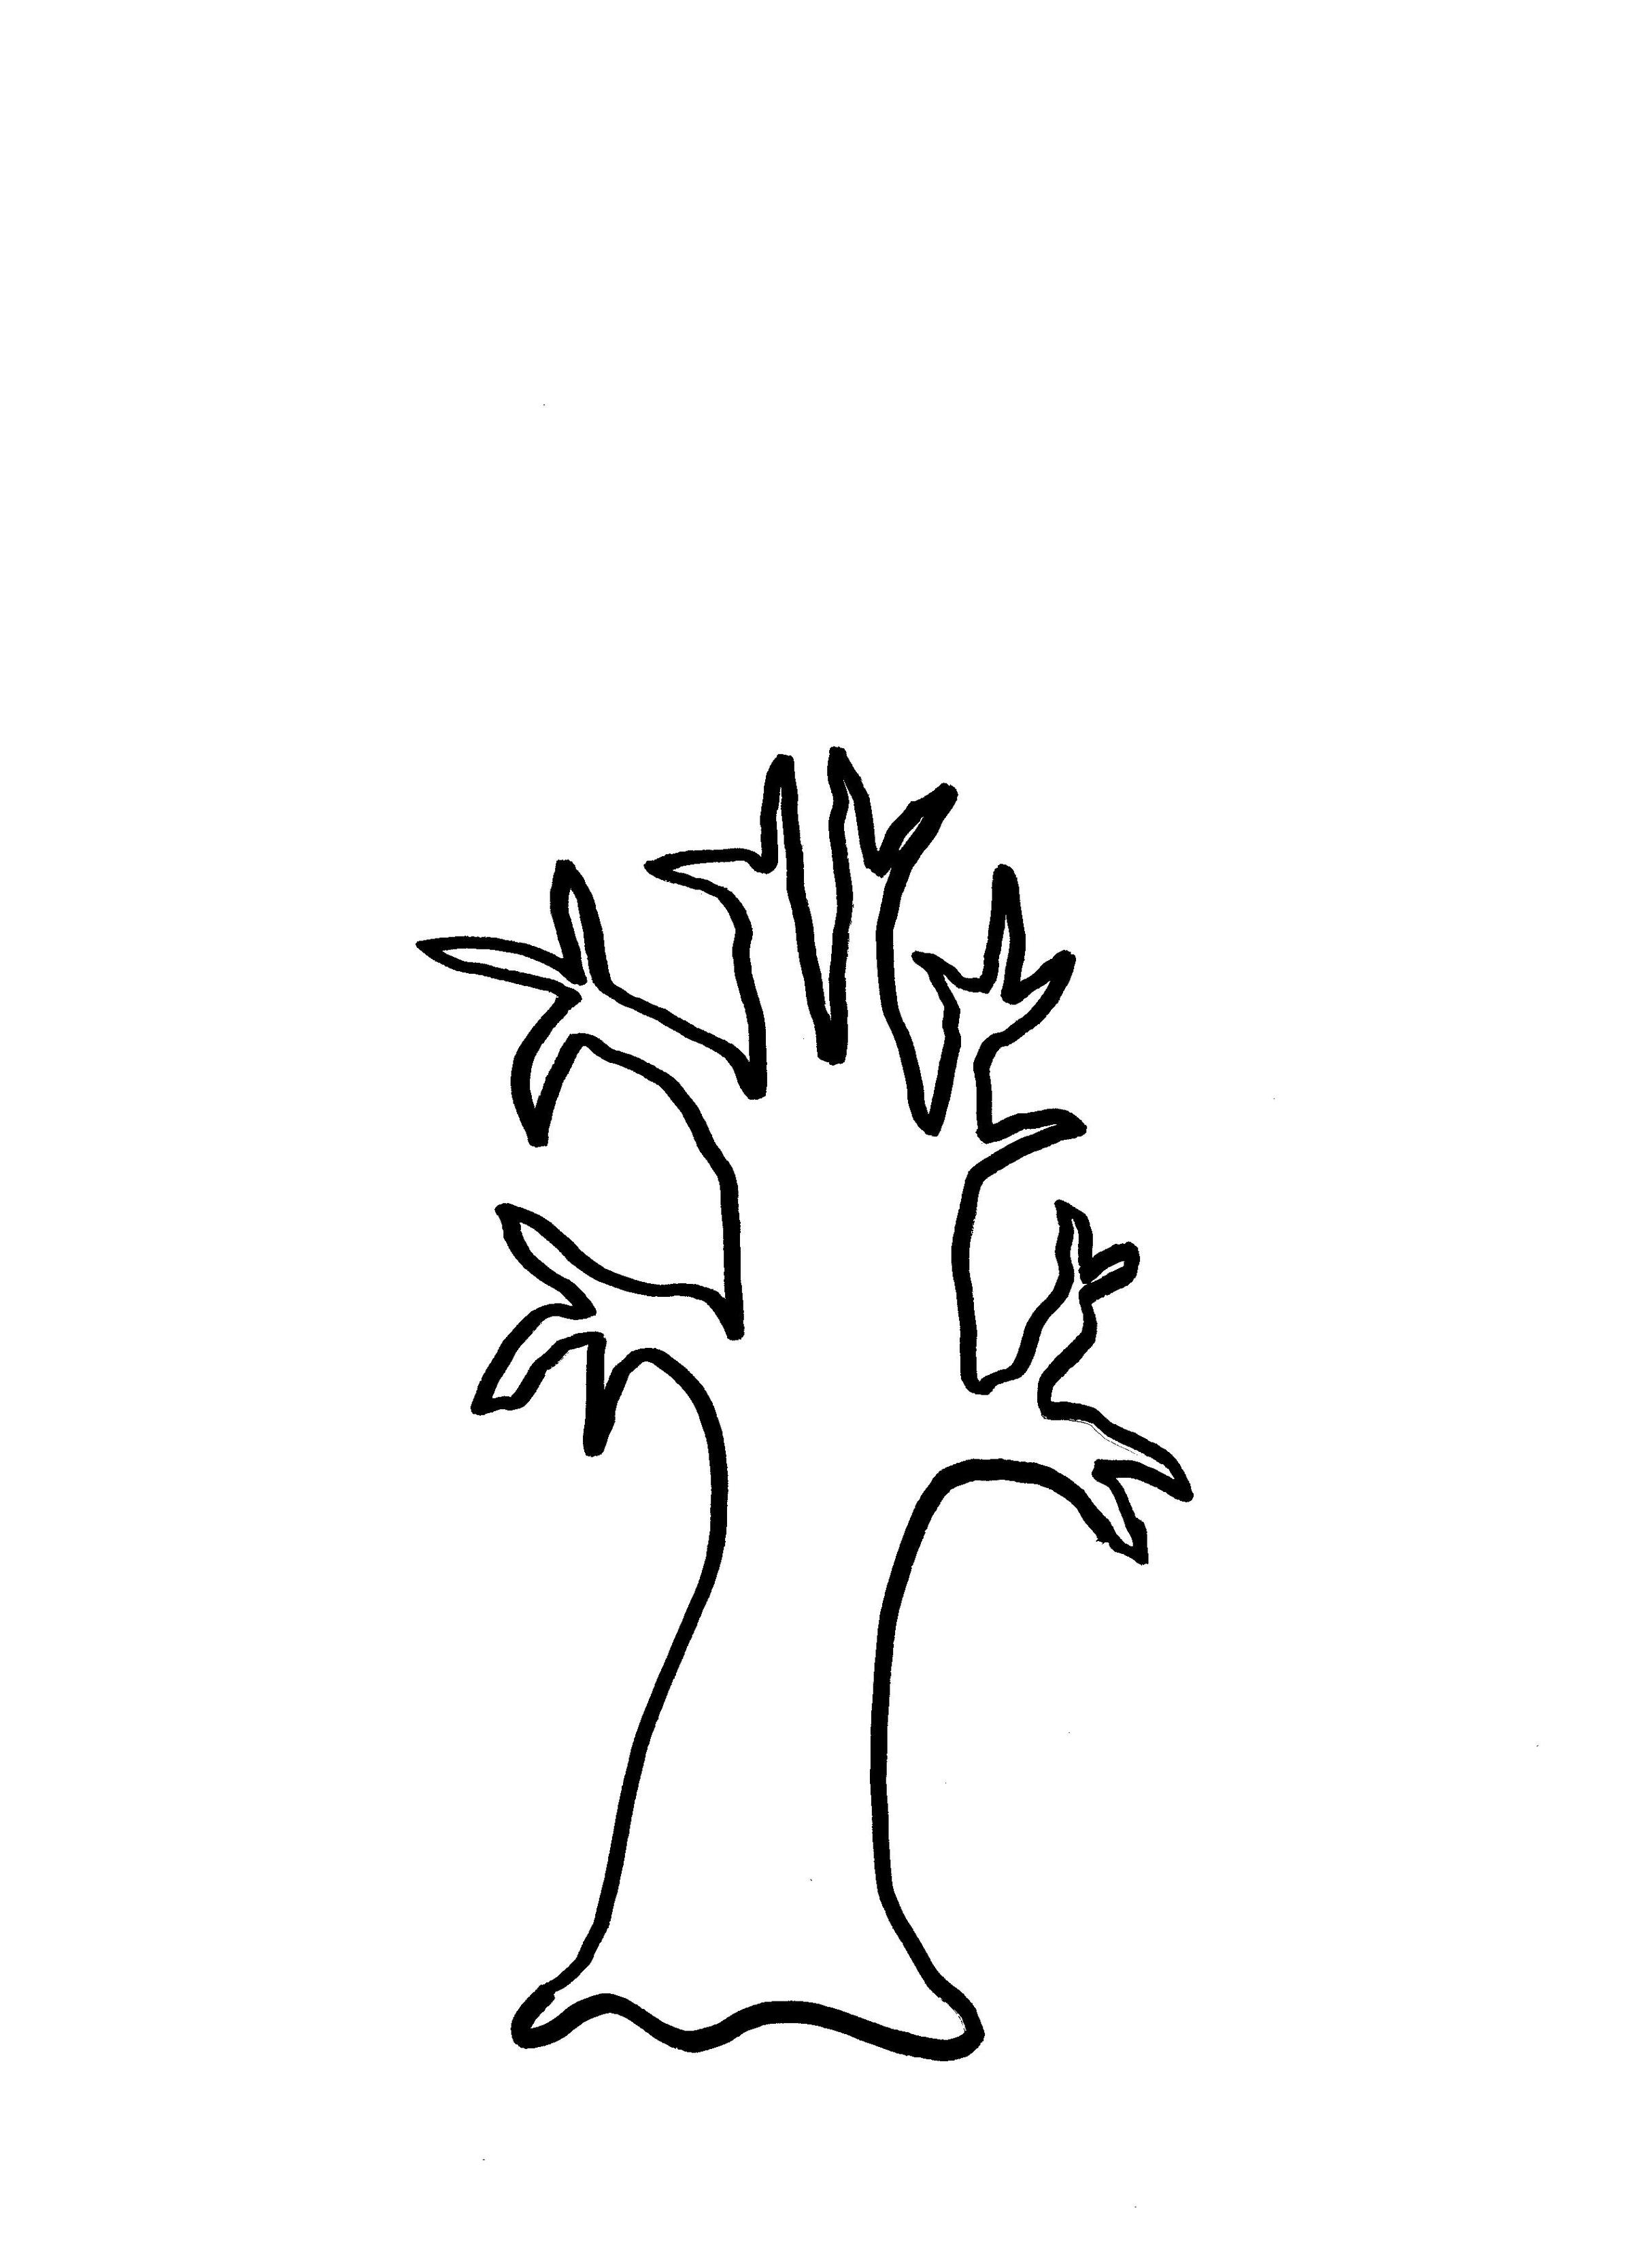 Coloring Page Of A Tree Trunk - Coloring Page - Coloring Home